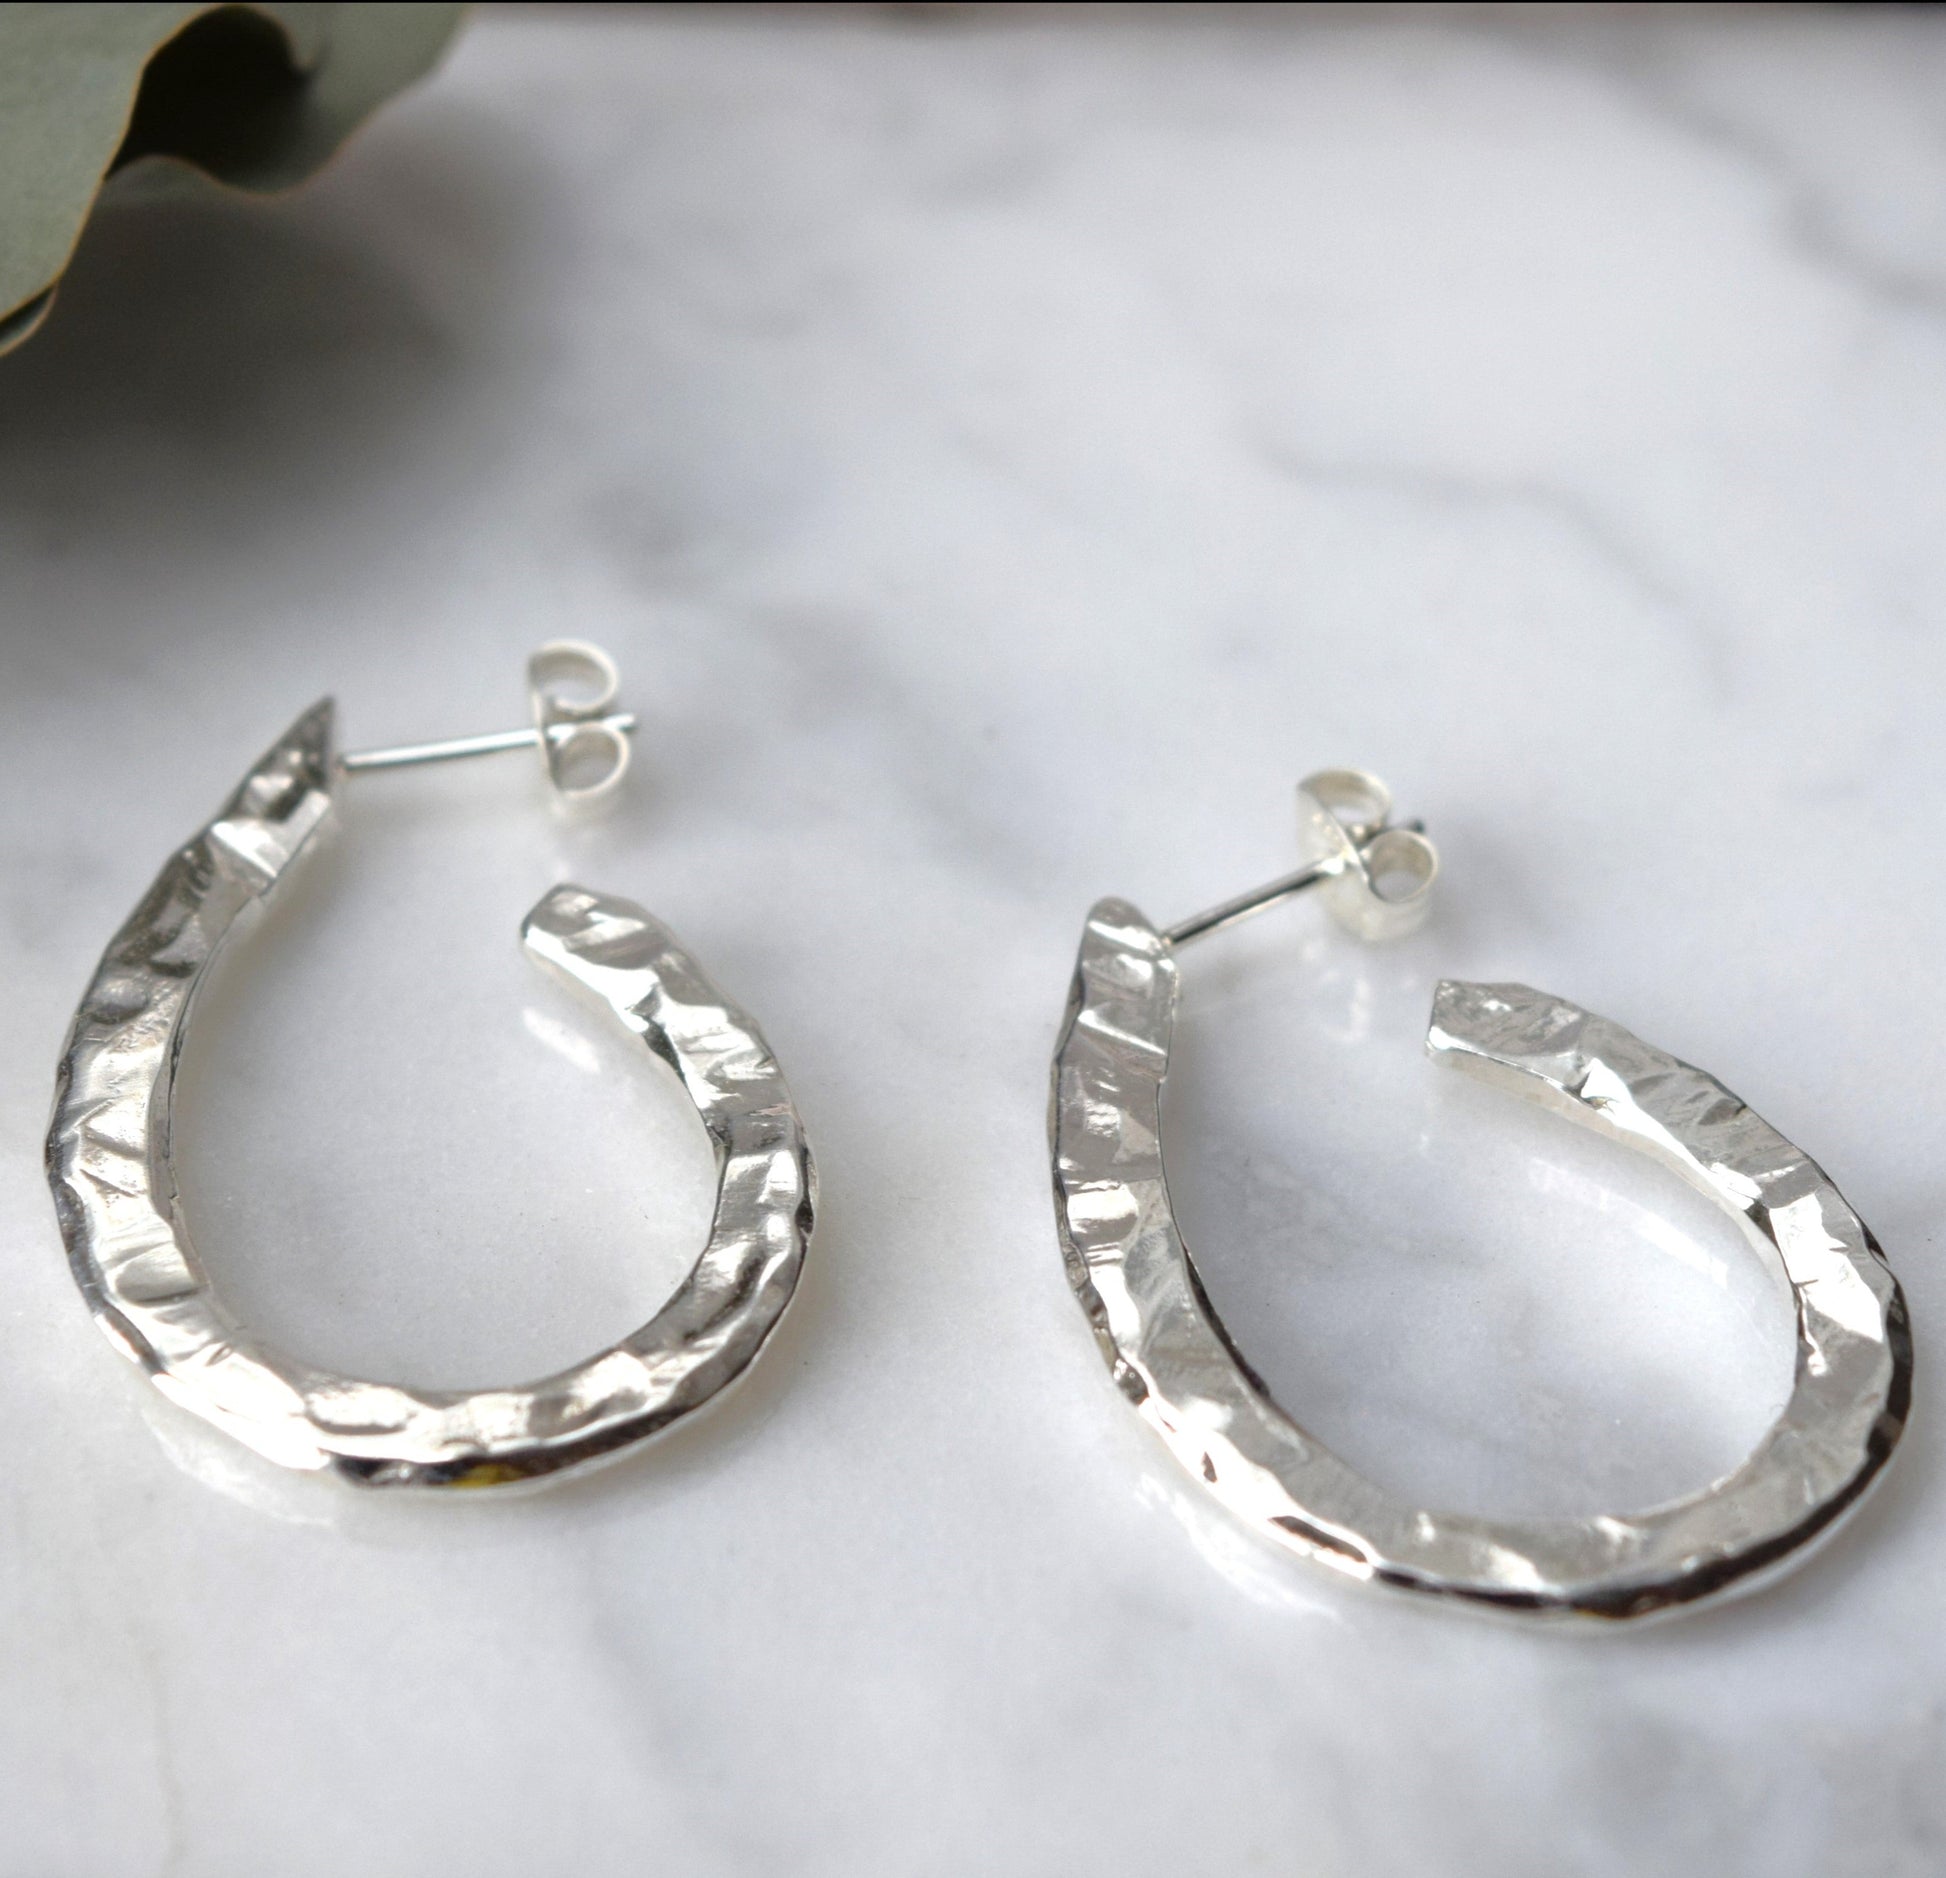 Carved oval hoop earrings resting against a stone on a white background with a mirror reflection in the background